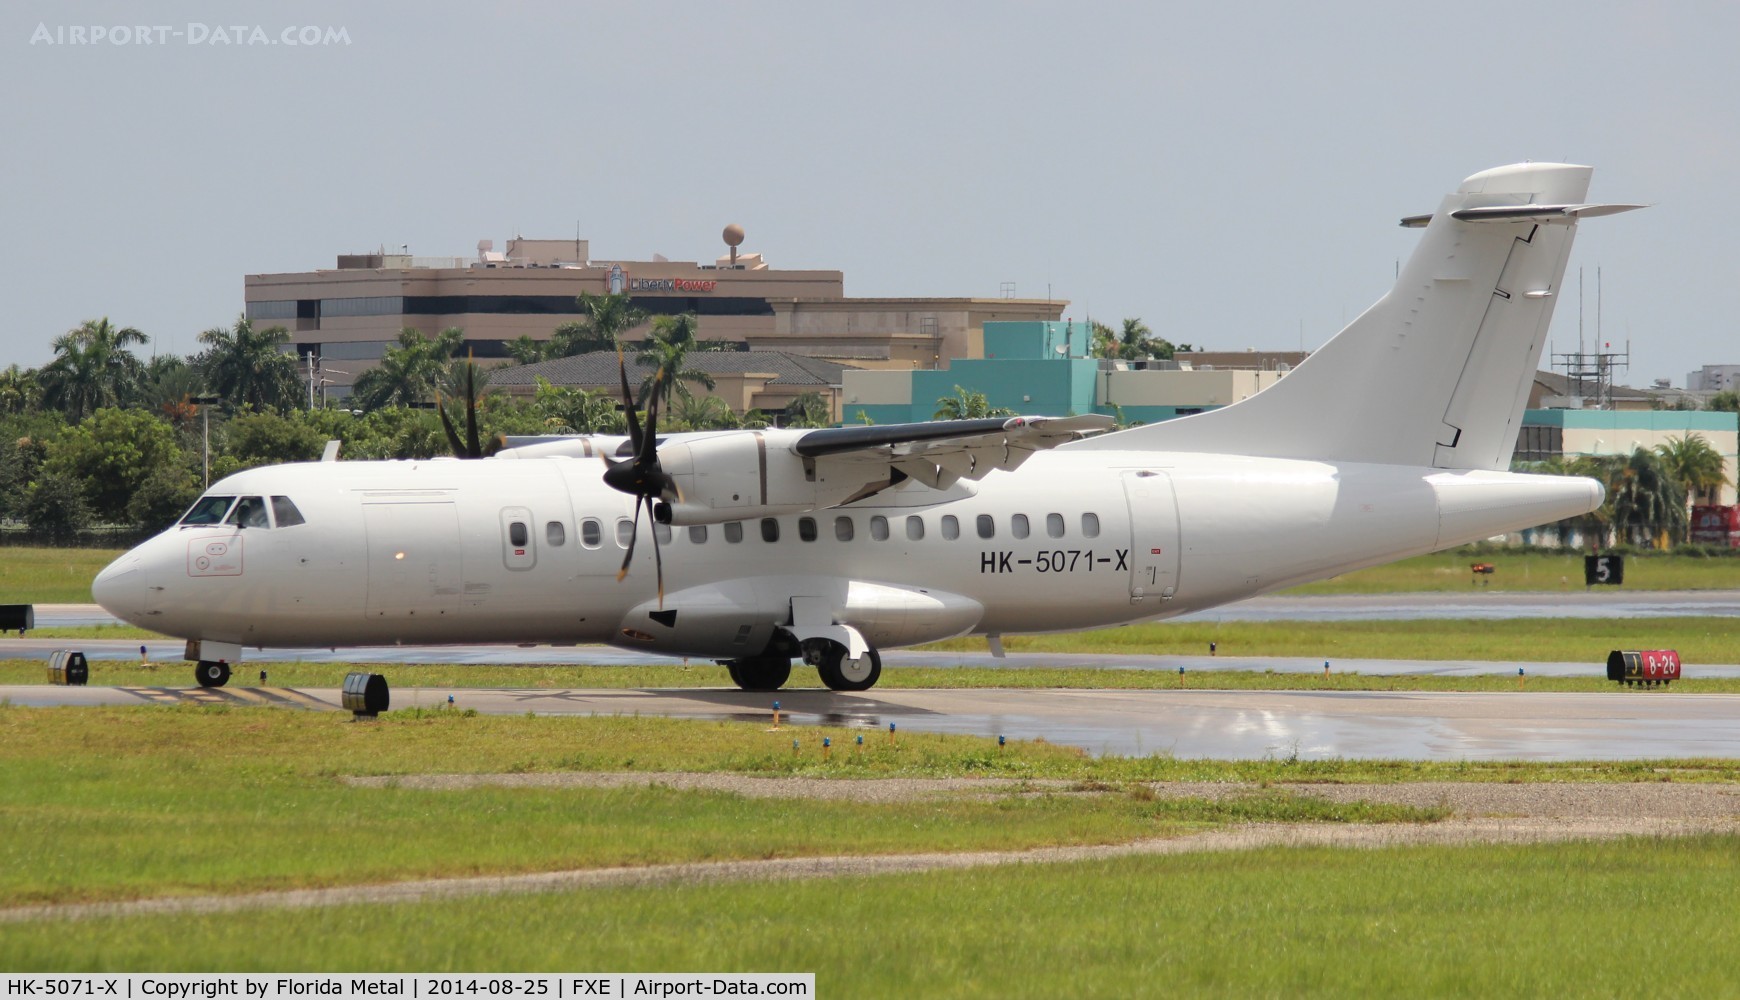 HK-5071-X, 2006 ATR 42-500 C/N 651, Easy Fly Colombia without titles ATR-42 on a delivery flight stopping off at FXE